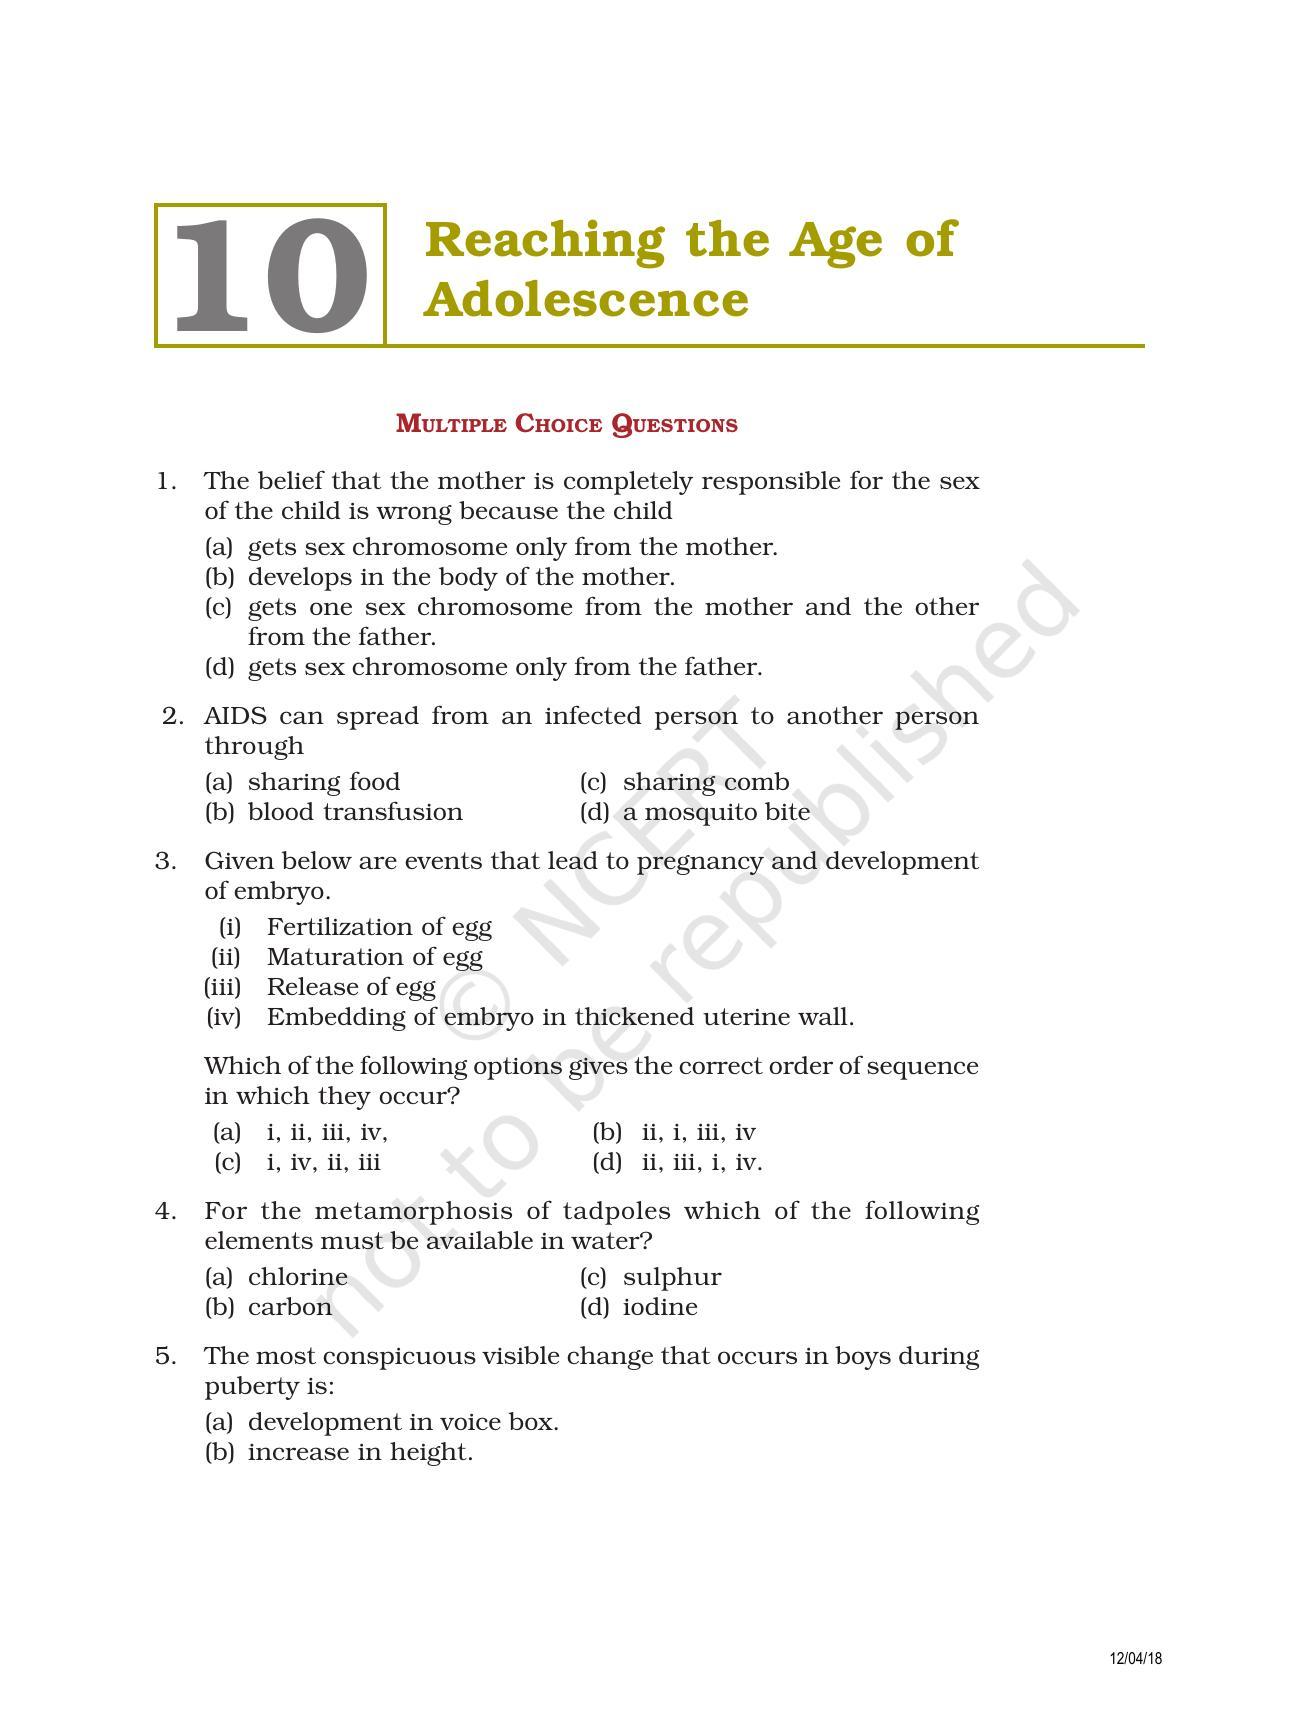 NCERT Exemplar Book for Class 8 Science: Chapter 10- Reaching the Age of Adolescence - Page 1